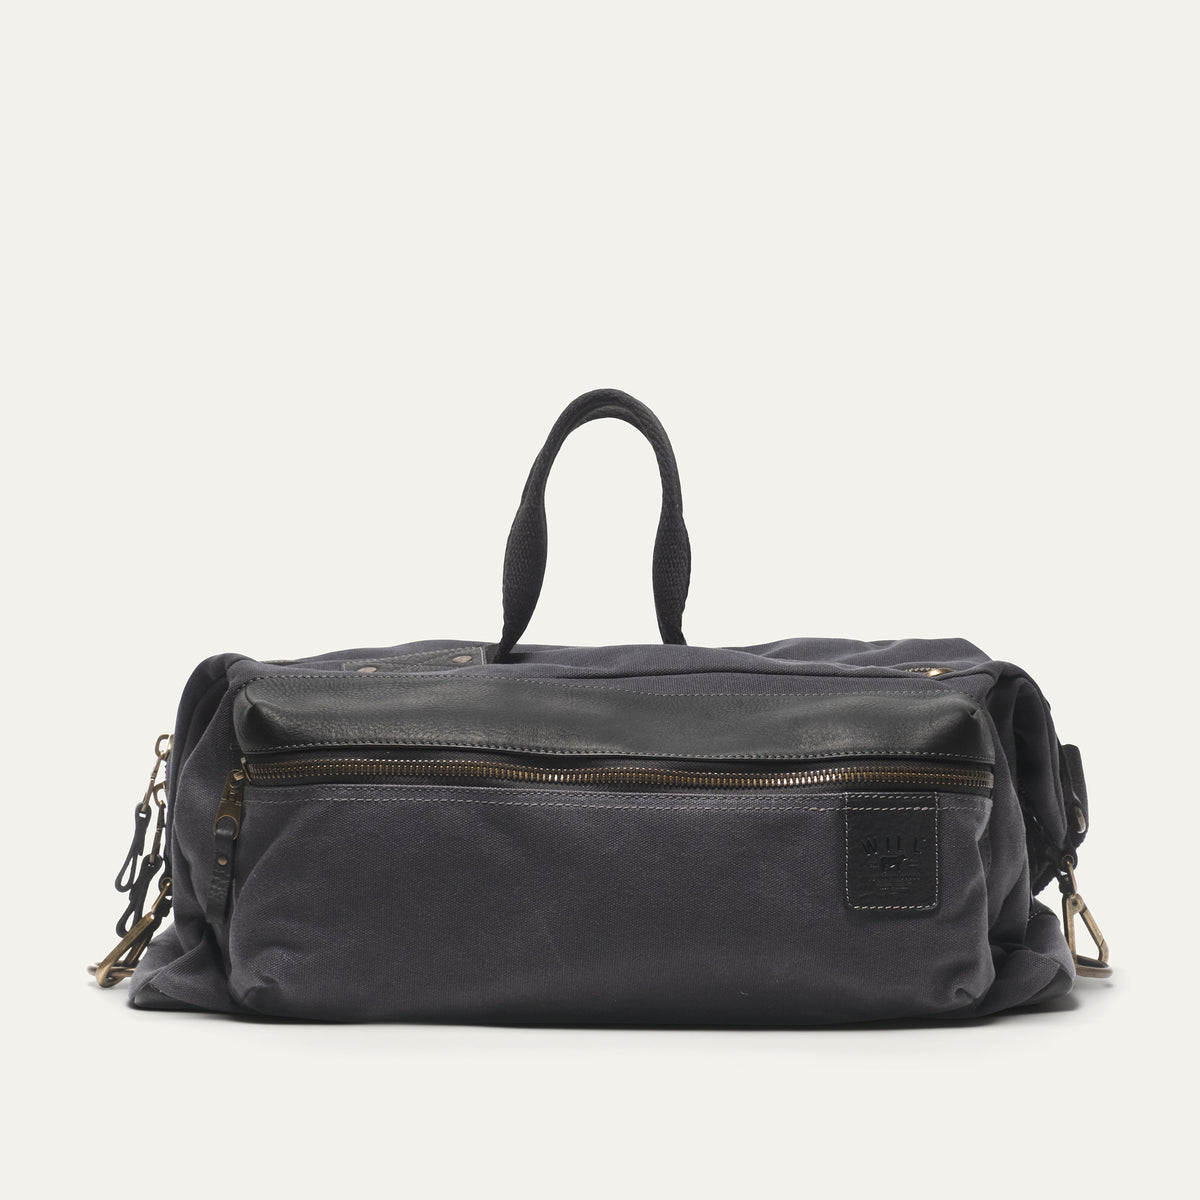 Black Tumbled Leather 2 Bag Set (Commuter Backpack and Duffle)